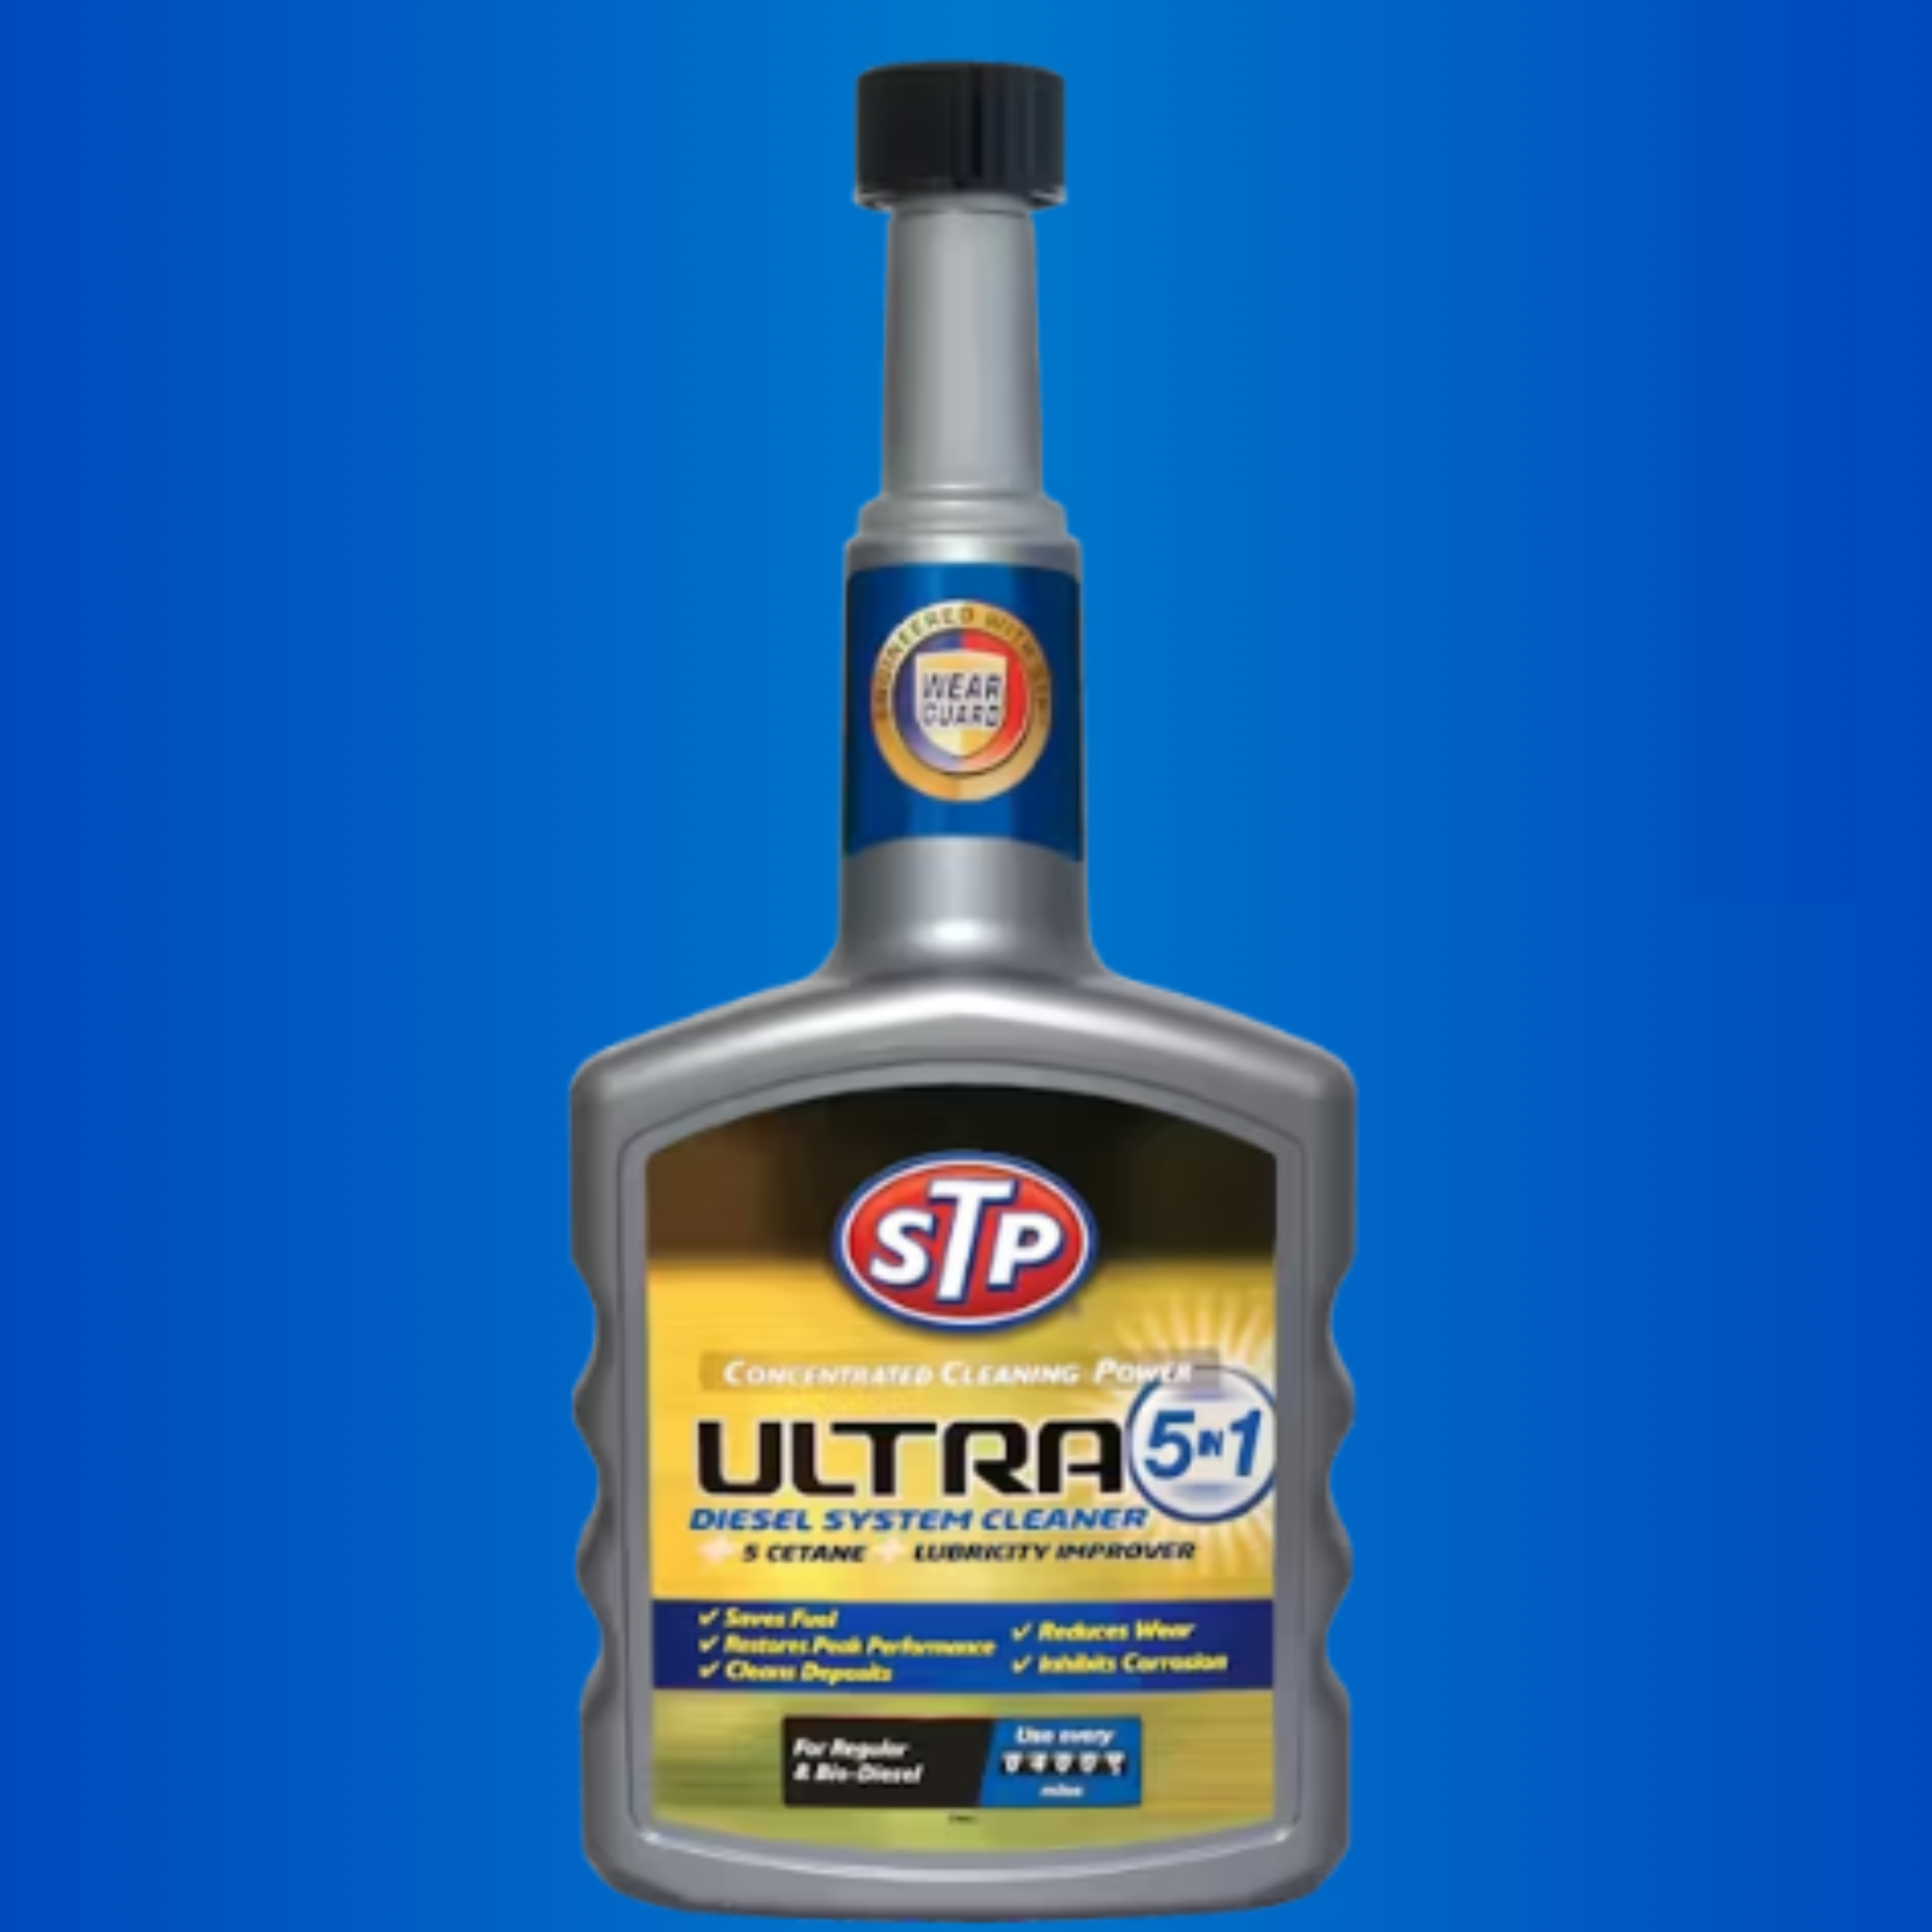 Stp Cleaning Power Ultra 5 In 1 Diesel System Cleaner 400 ml